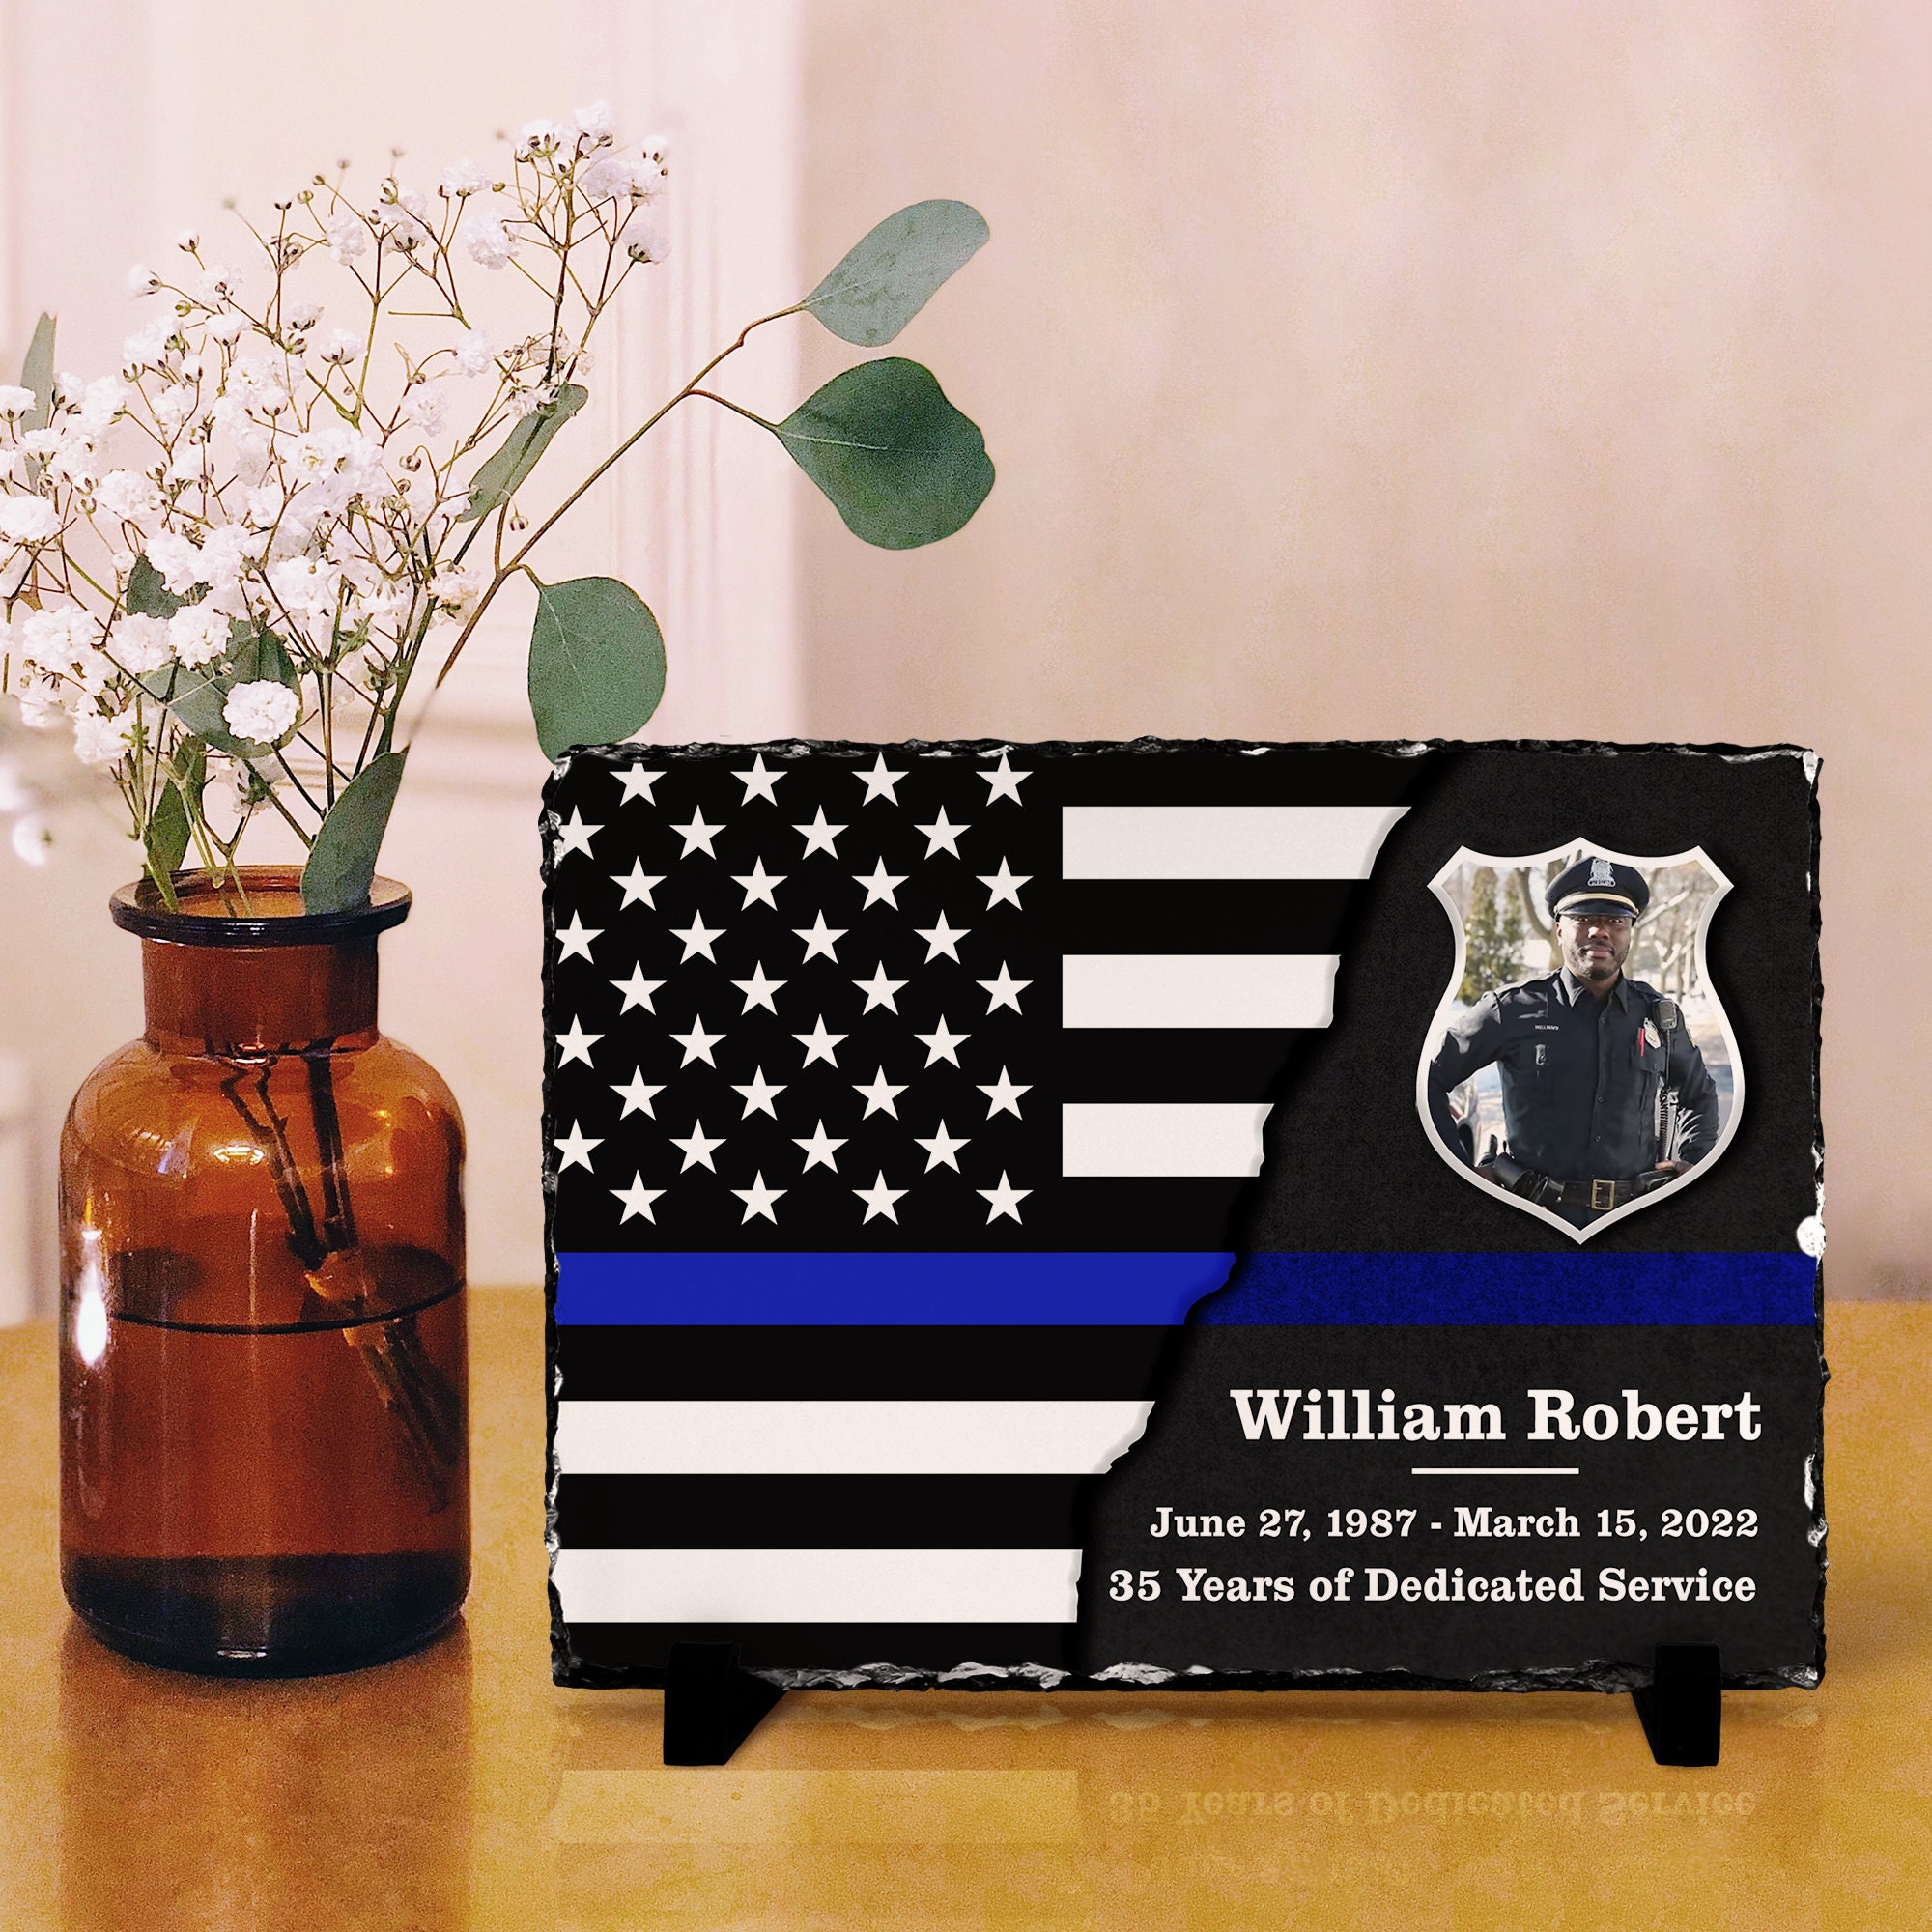  QOJUYO Police Retirement Gifts, Retirement Gifts for Men  Blanket 60x50, Retired Police Officer Gifts, Police Officer Retirement  Gifts, Best Retirement Gifts for Correctional Officer/Cops/Sheriff : Cell  Phones & Accessories